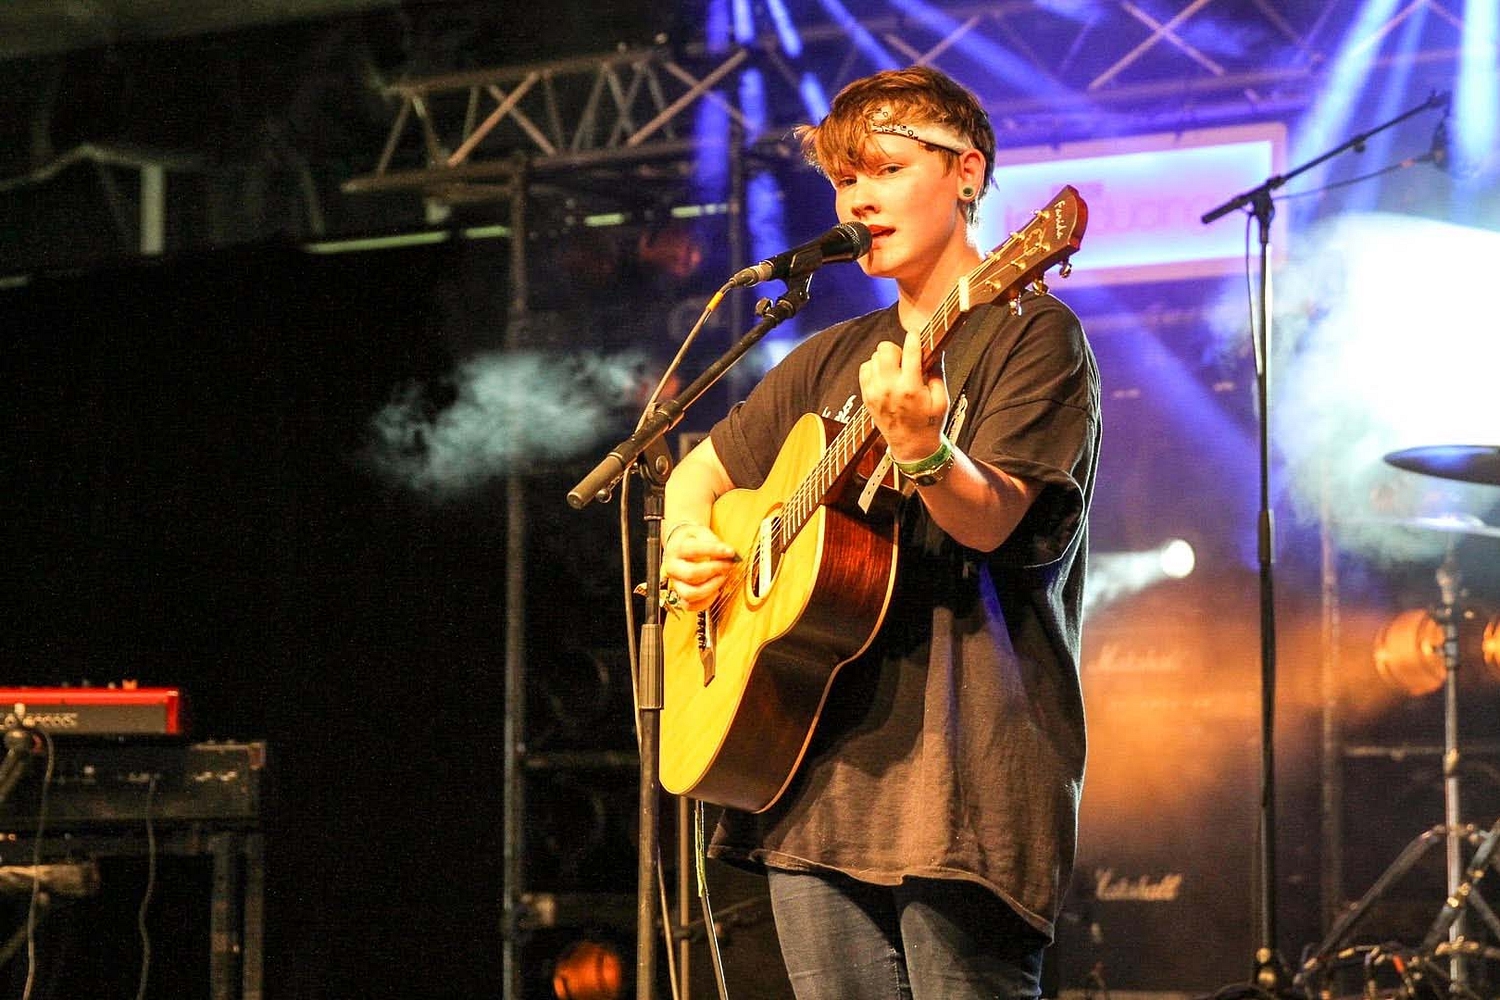 Glaston-busy? Saturday’s acts you might’ve missed